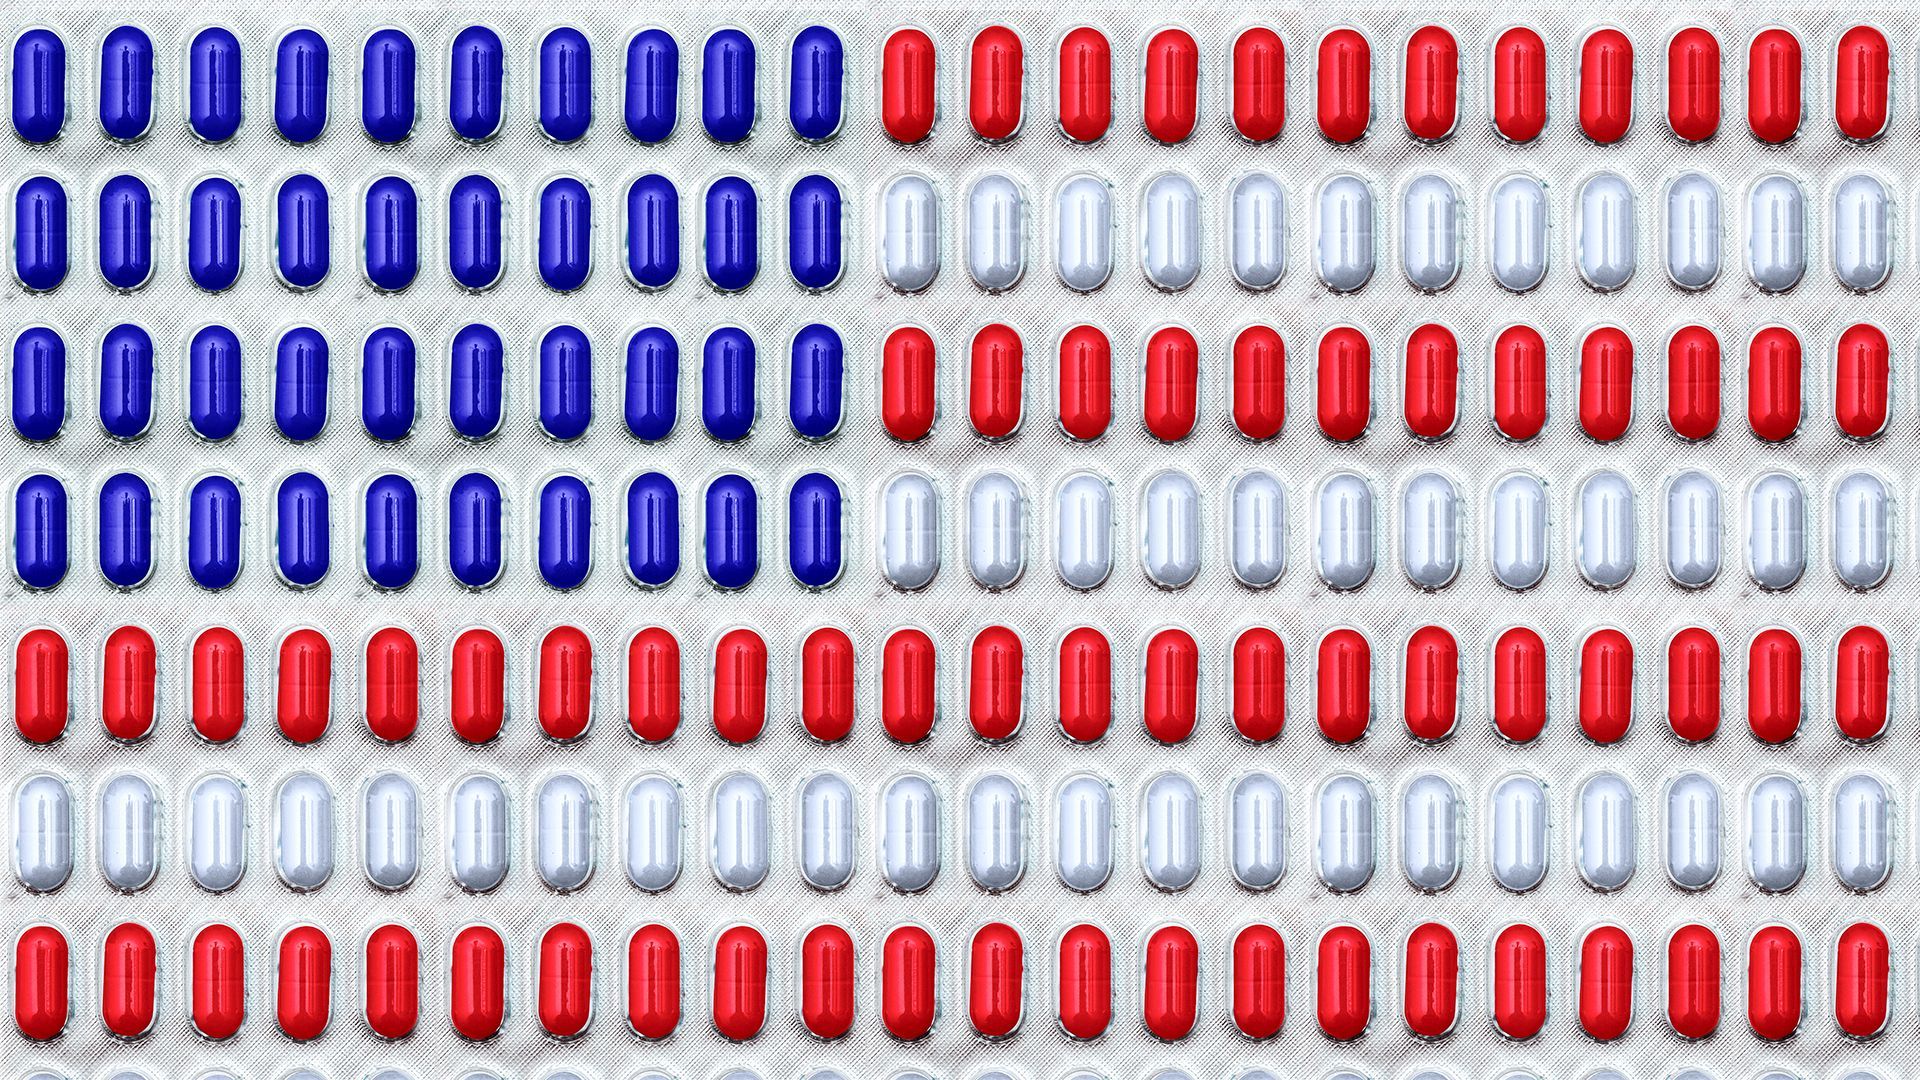 Illustration of the American flag made out of rows of pill capsules.